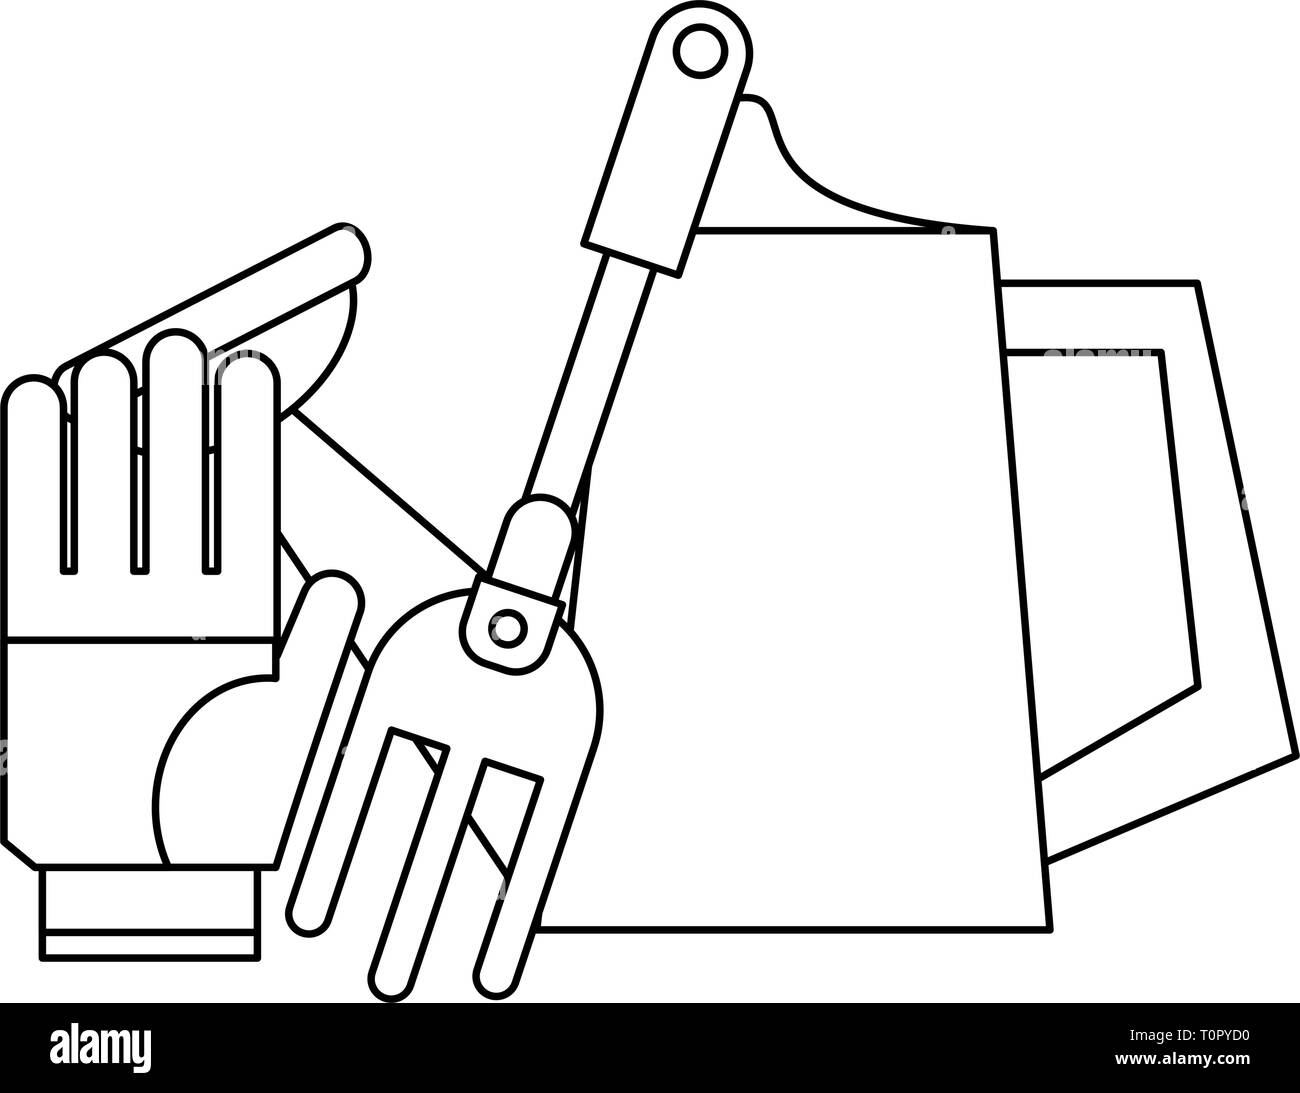 Gardening tools concept in black and white Stock Vector